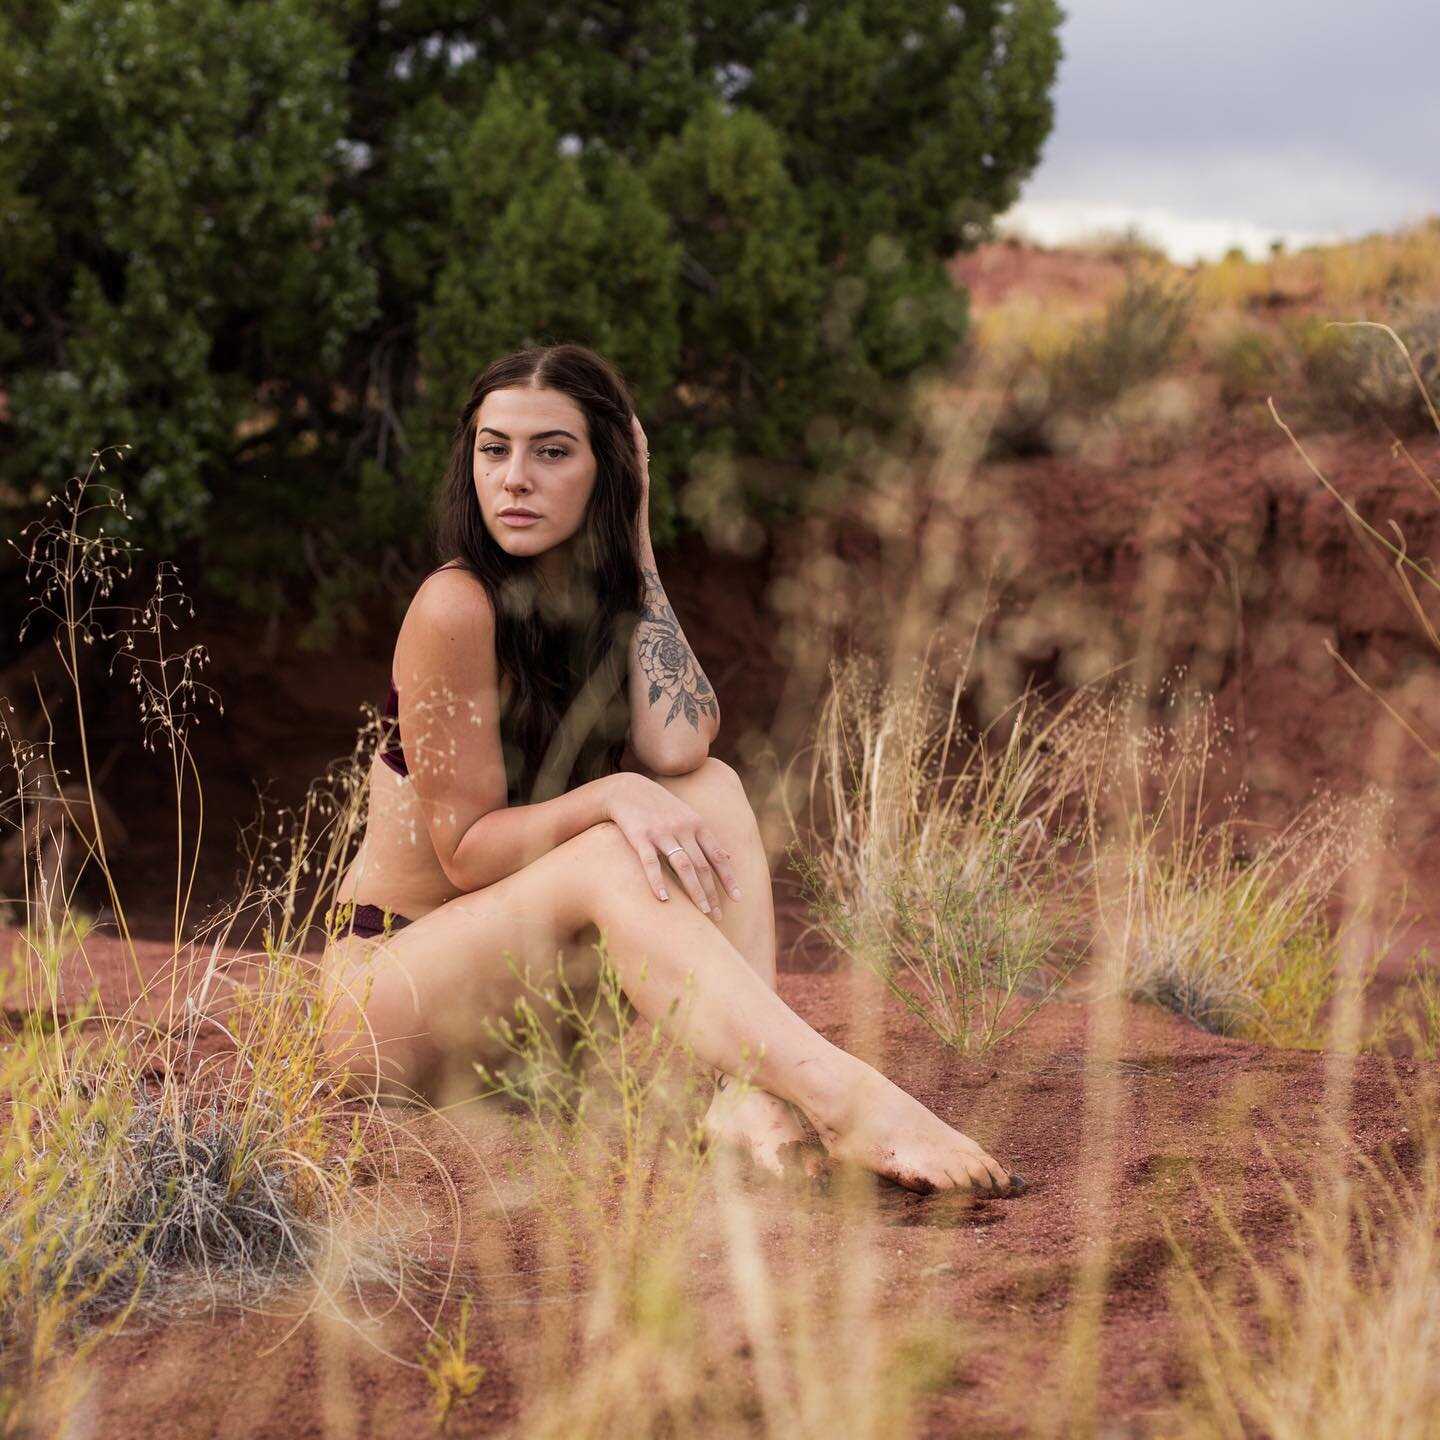 The best season for outdoor boudoir sessions is almost at an end. I&rsquo;ve got a couple dates left for this month if you really want to get your panties dirty! 😜 @jaeda.ezra 
.
.
.
#boudoirbykaleigh #moab #moabboudoir #kaleighwelchphotography